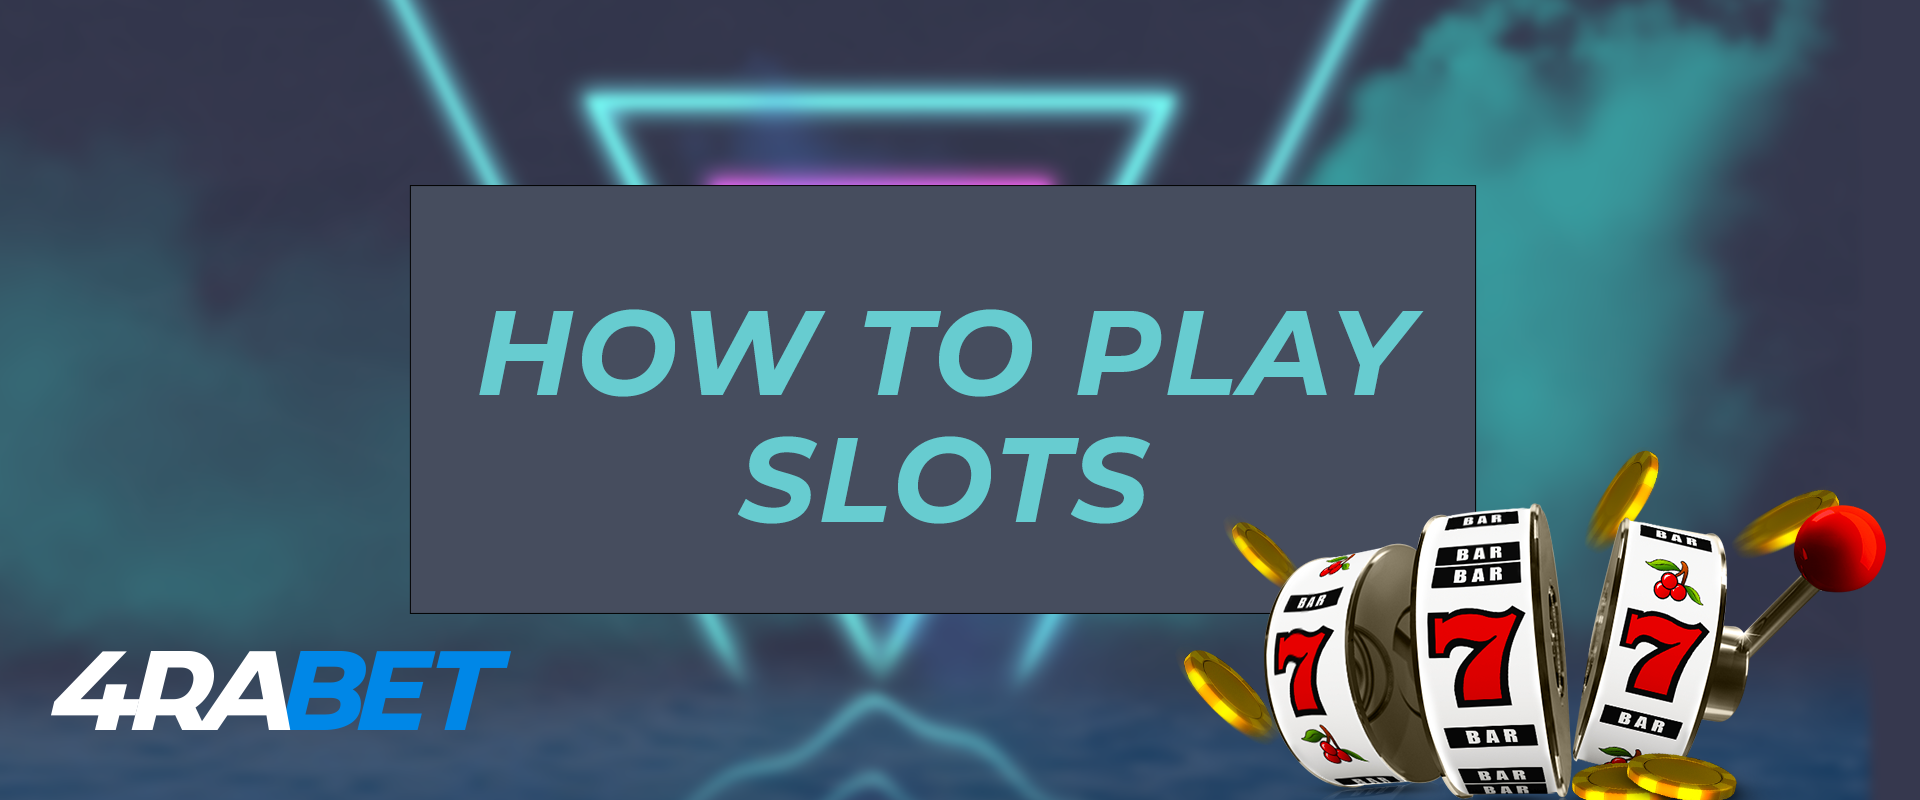 how to play slots on the 4rabet casino.